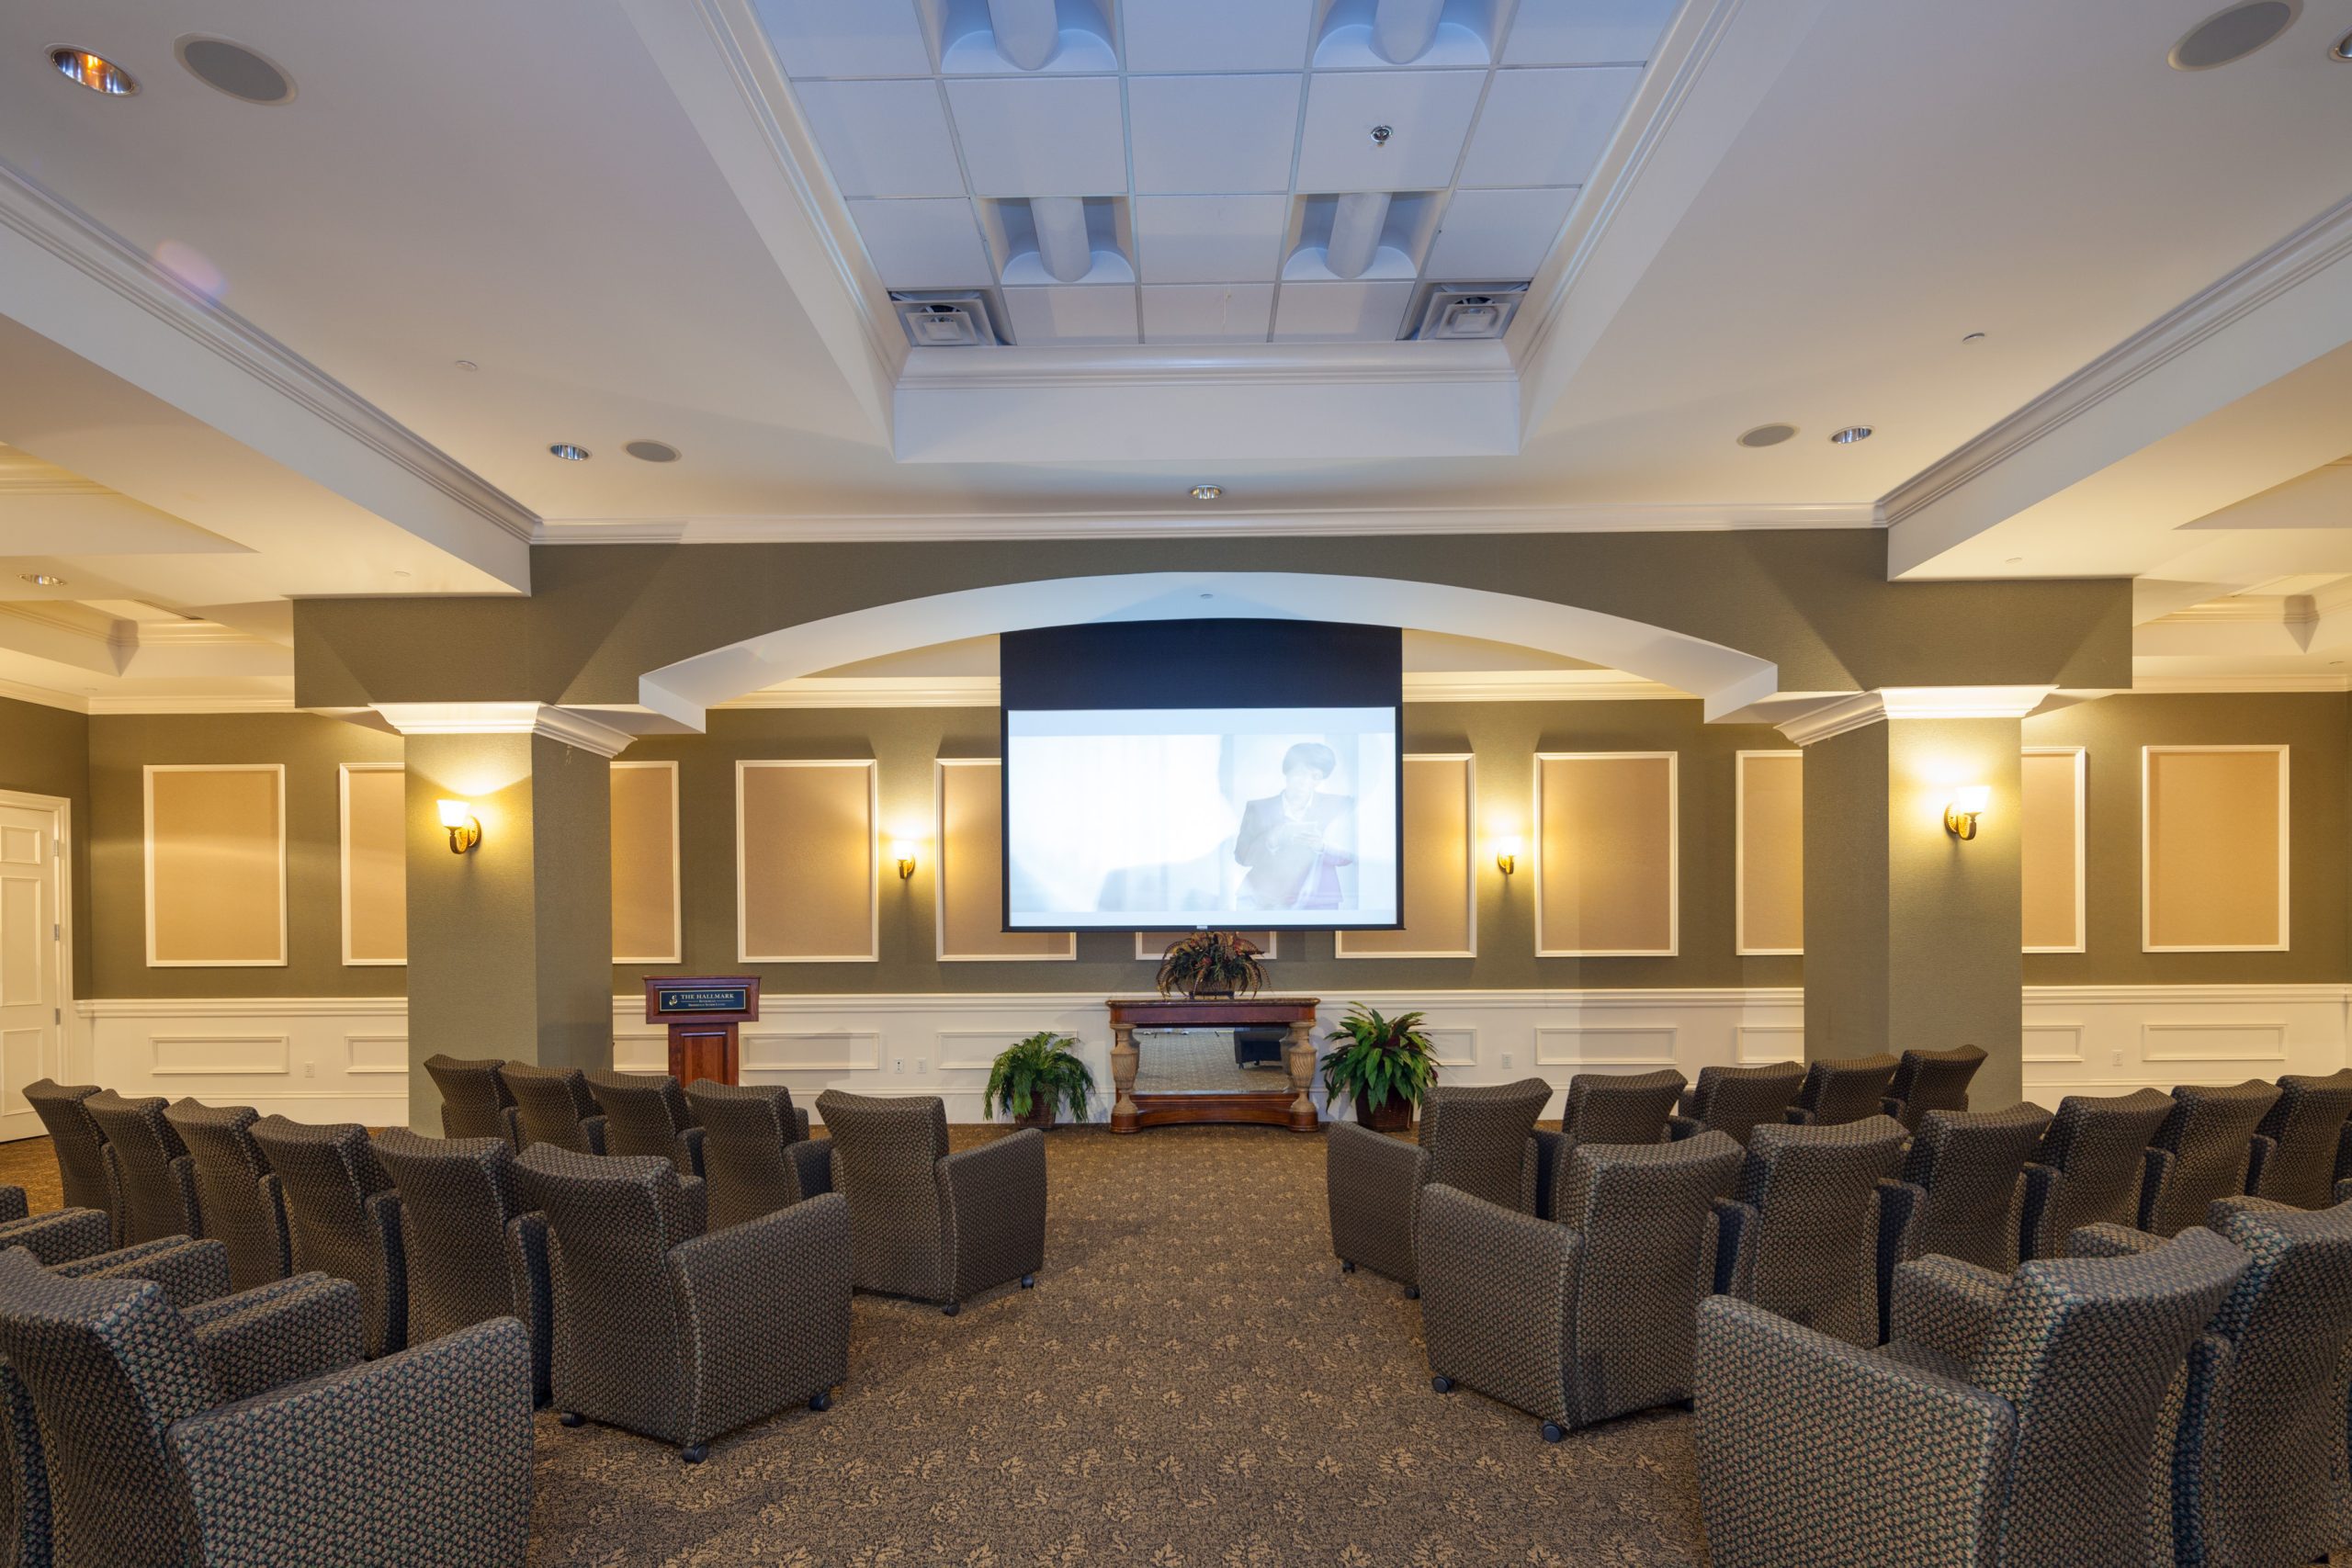 movie theater in a retirement community with about 20 seats